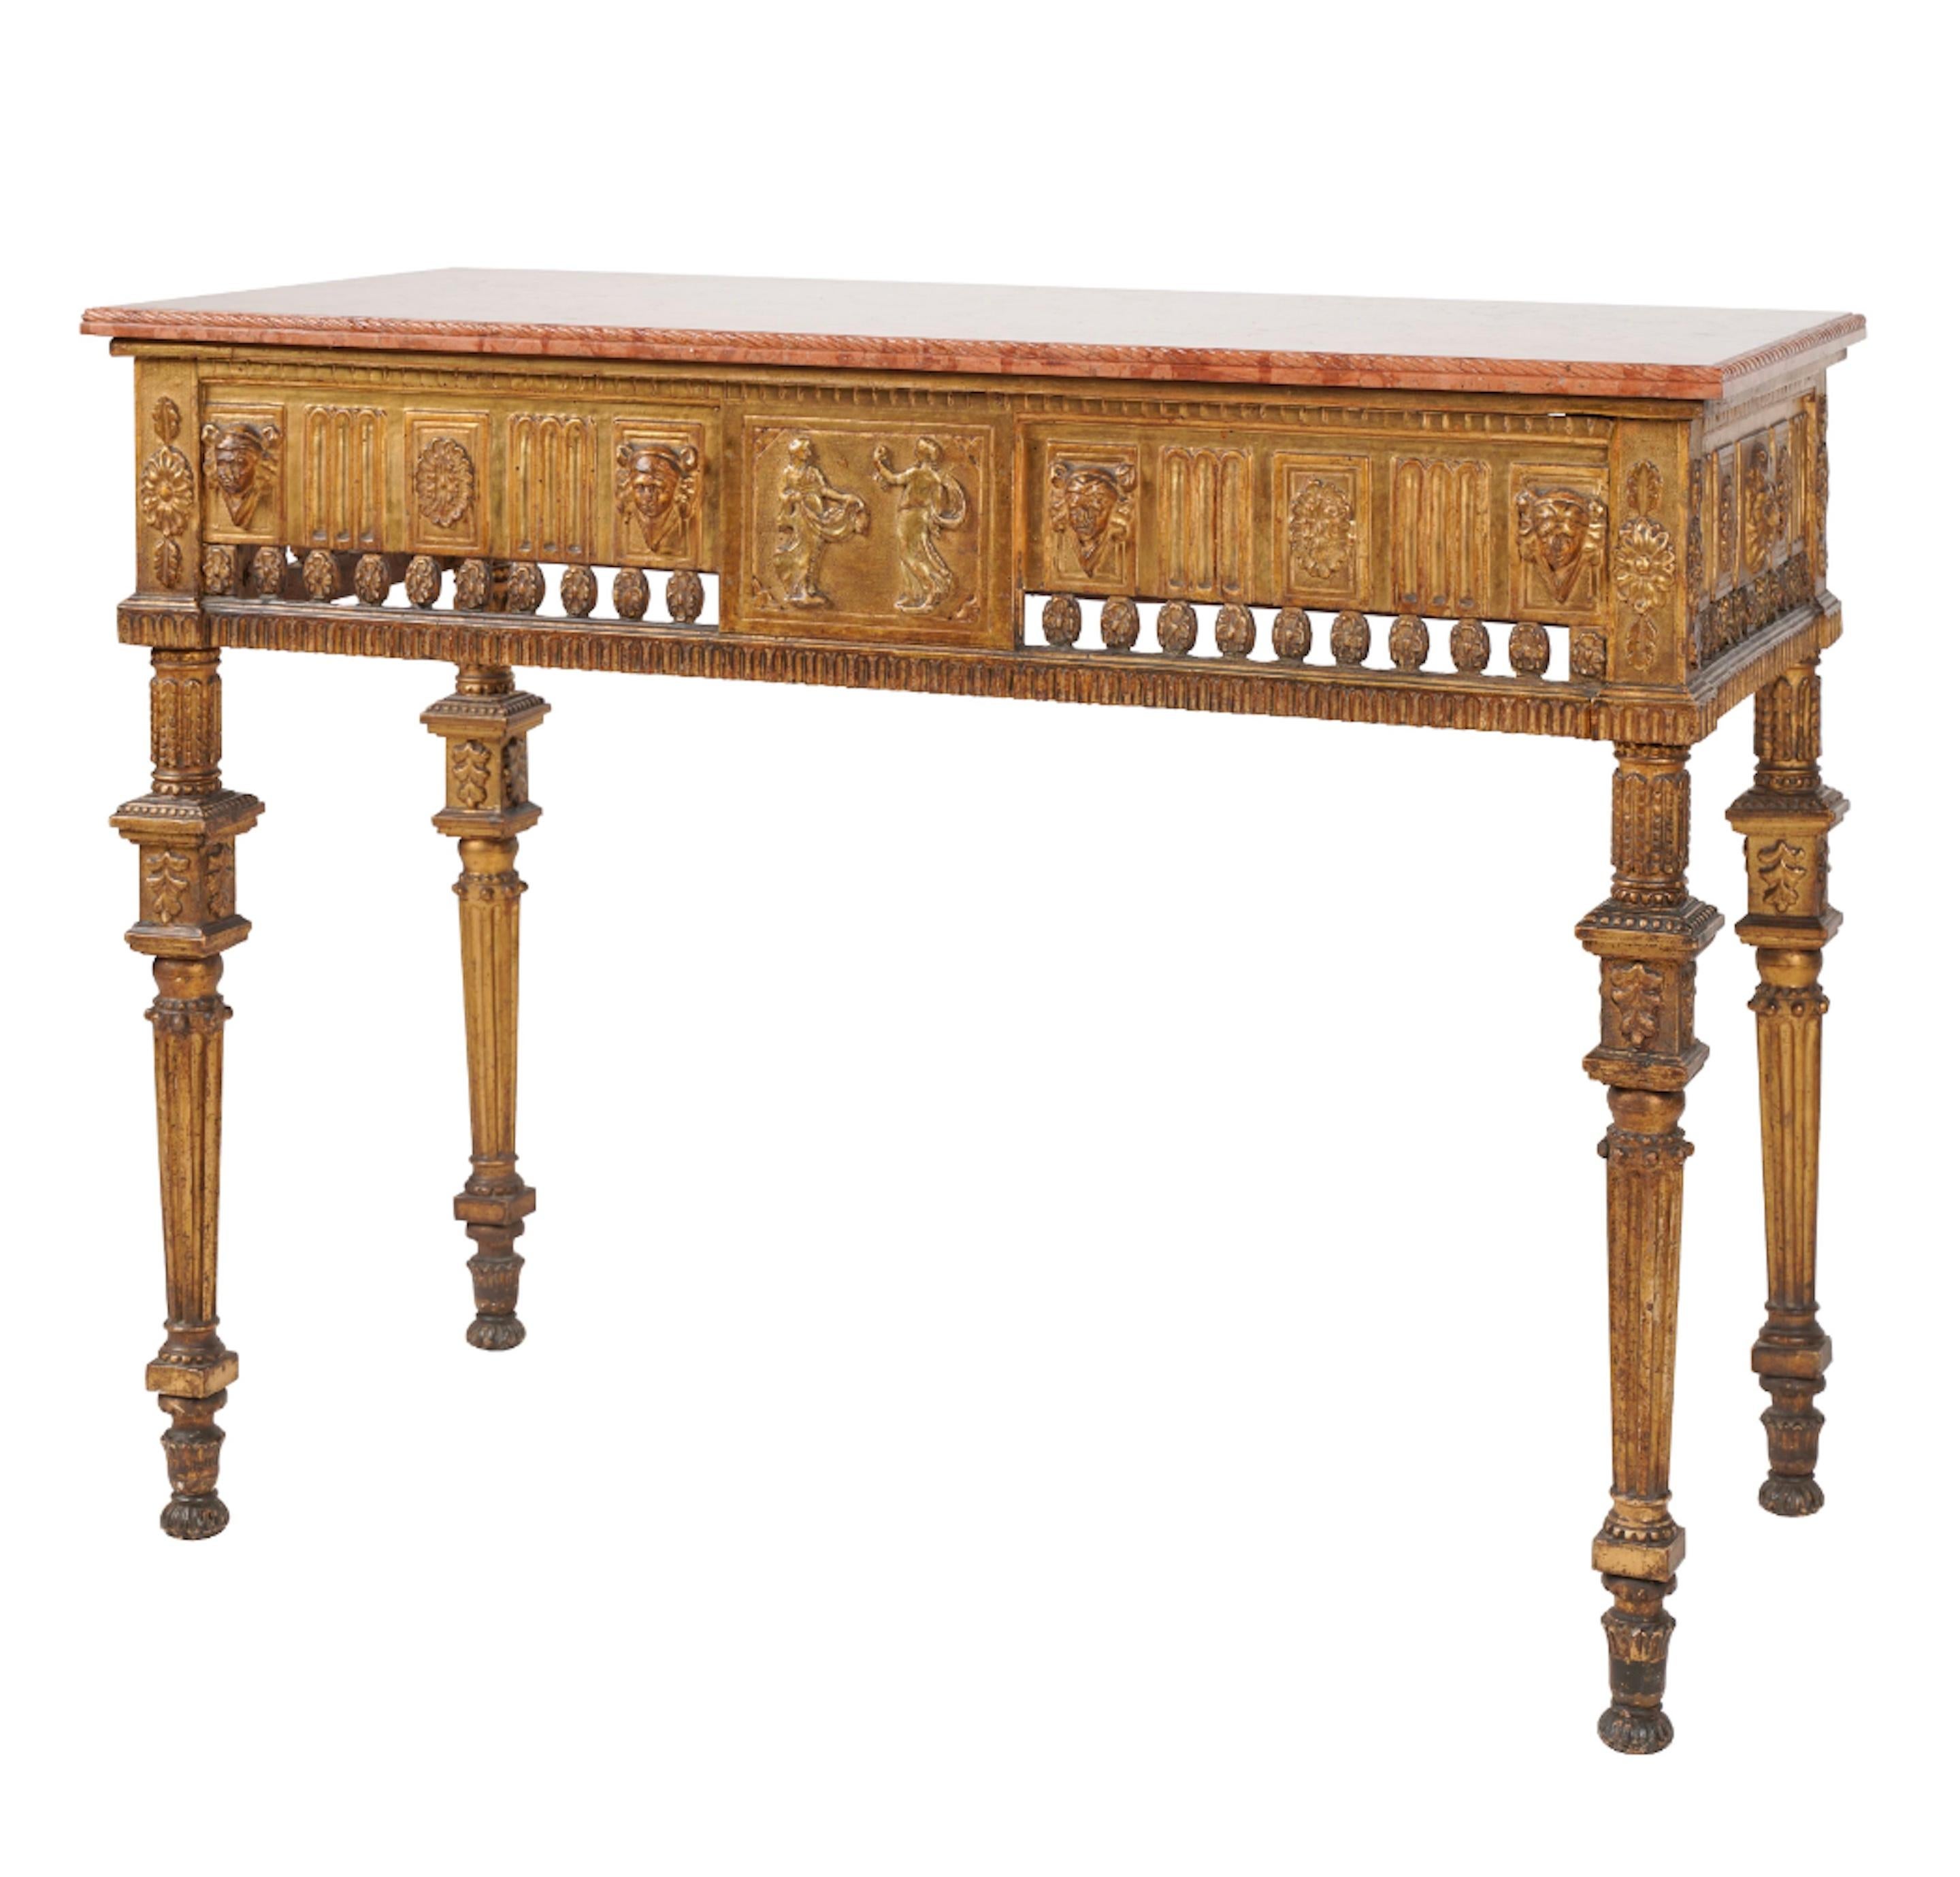 Neoclassical hand carved, gilt wood and rouge marble console.  The marble top has a carved molded edge, the frieze relief is carved with masks and rosettes and a pierced border of rosettes, flanking a central panel with a pair of dancing figures.